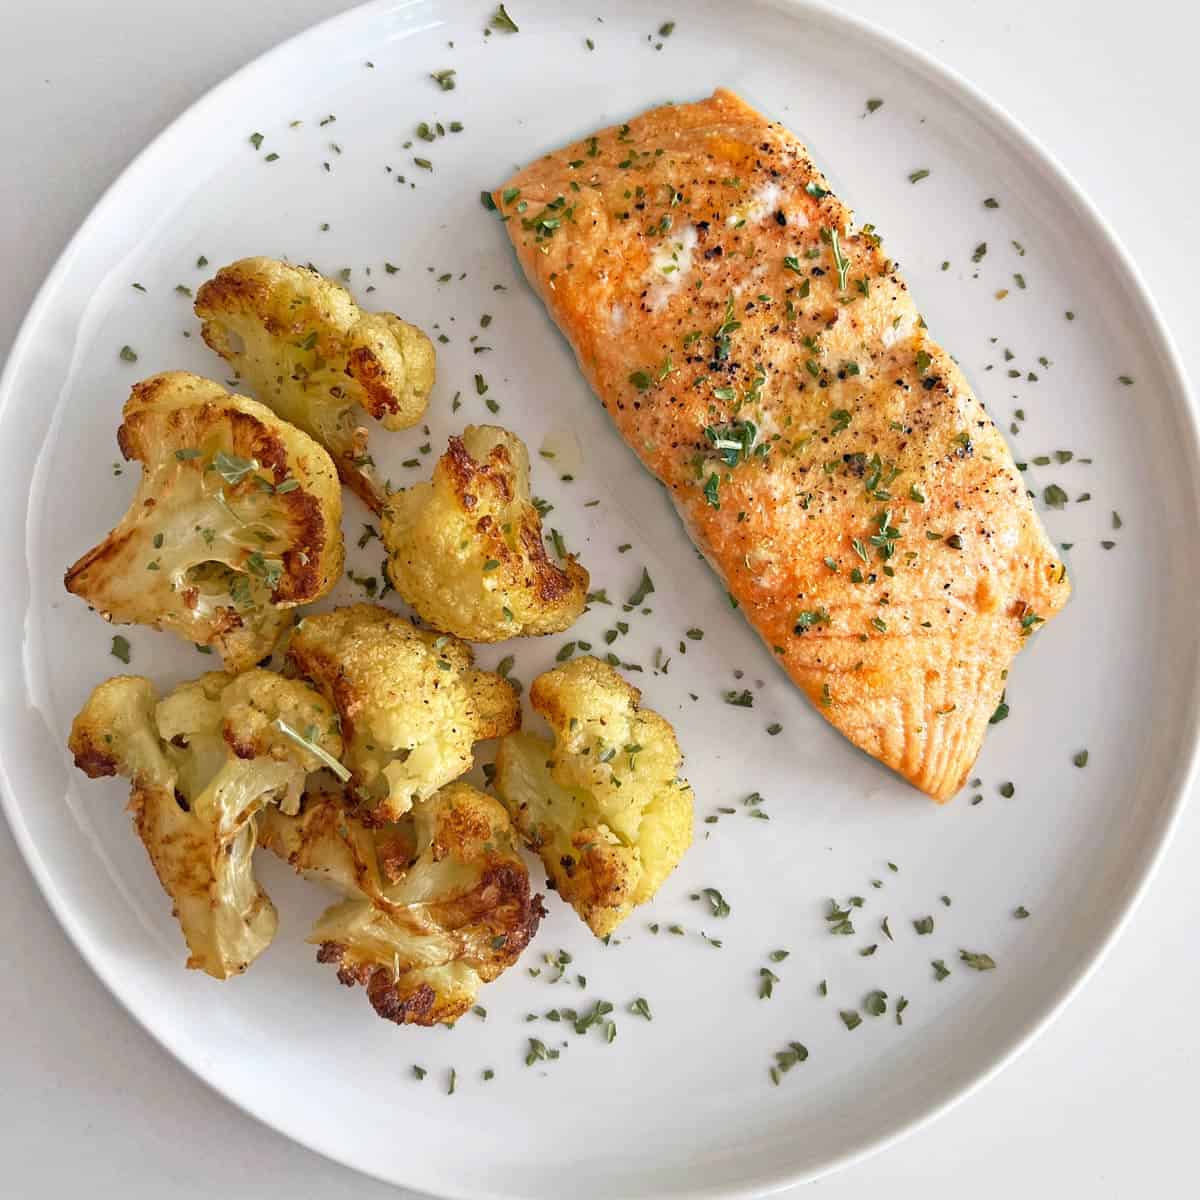 Baked salmon served with roasted cauliflower.